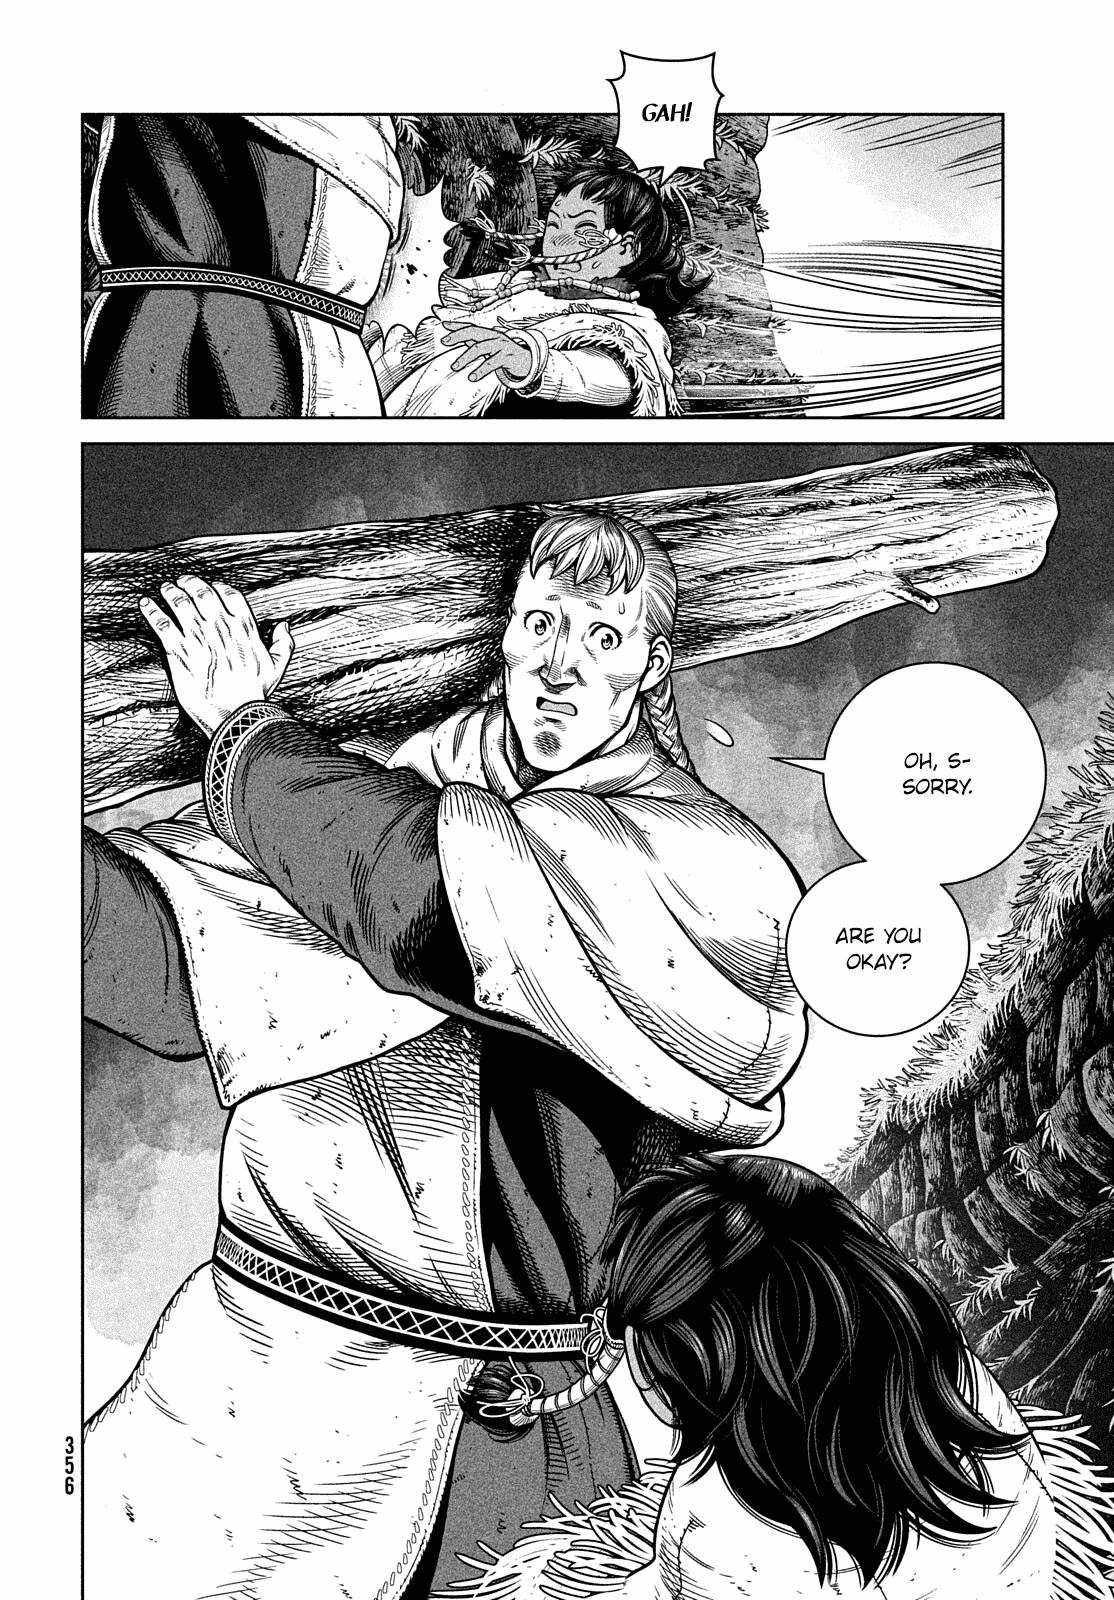 vinland saga 187, vinland saga 187, Read vinland saga 187, vinland saga 187 Manga, vinland saga 187 english, vinland saga 187 raw manga, vinland saga 187 online, vinland saga 187 high quality, vinland saga 187 chapter, vinland saga 187 manga scan